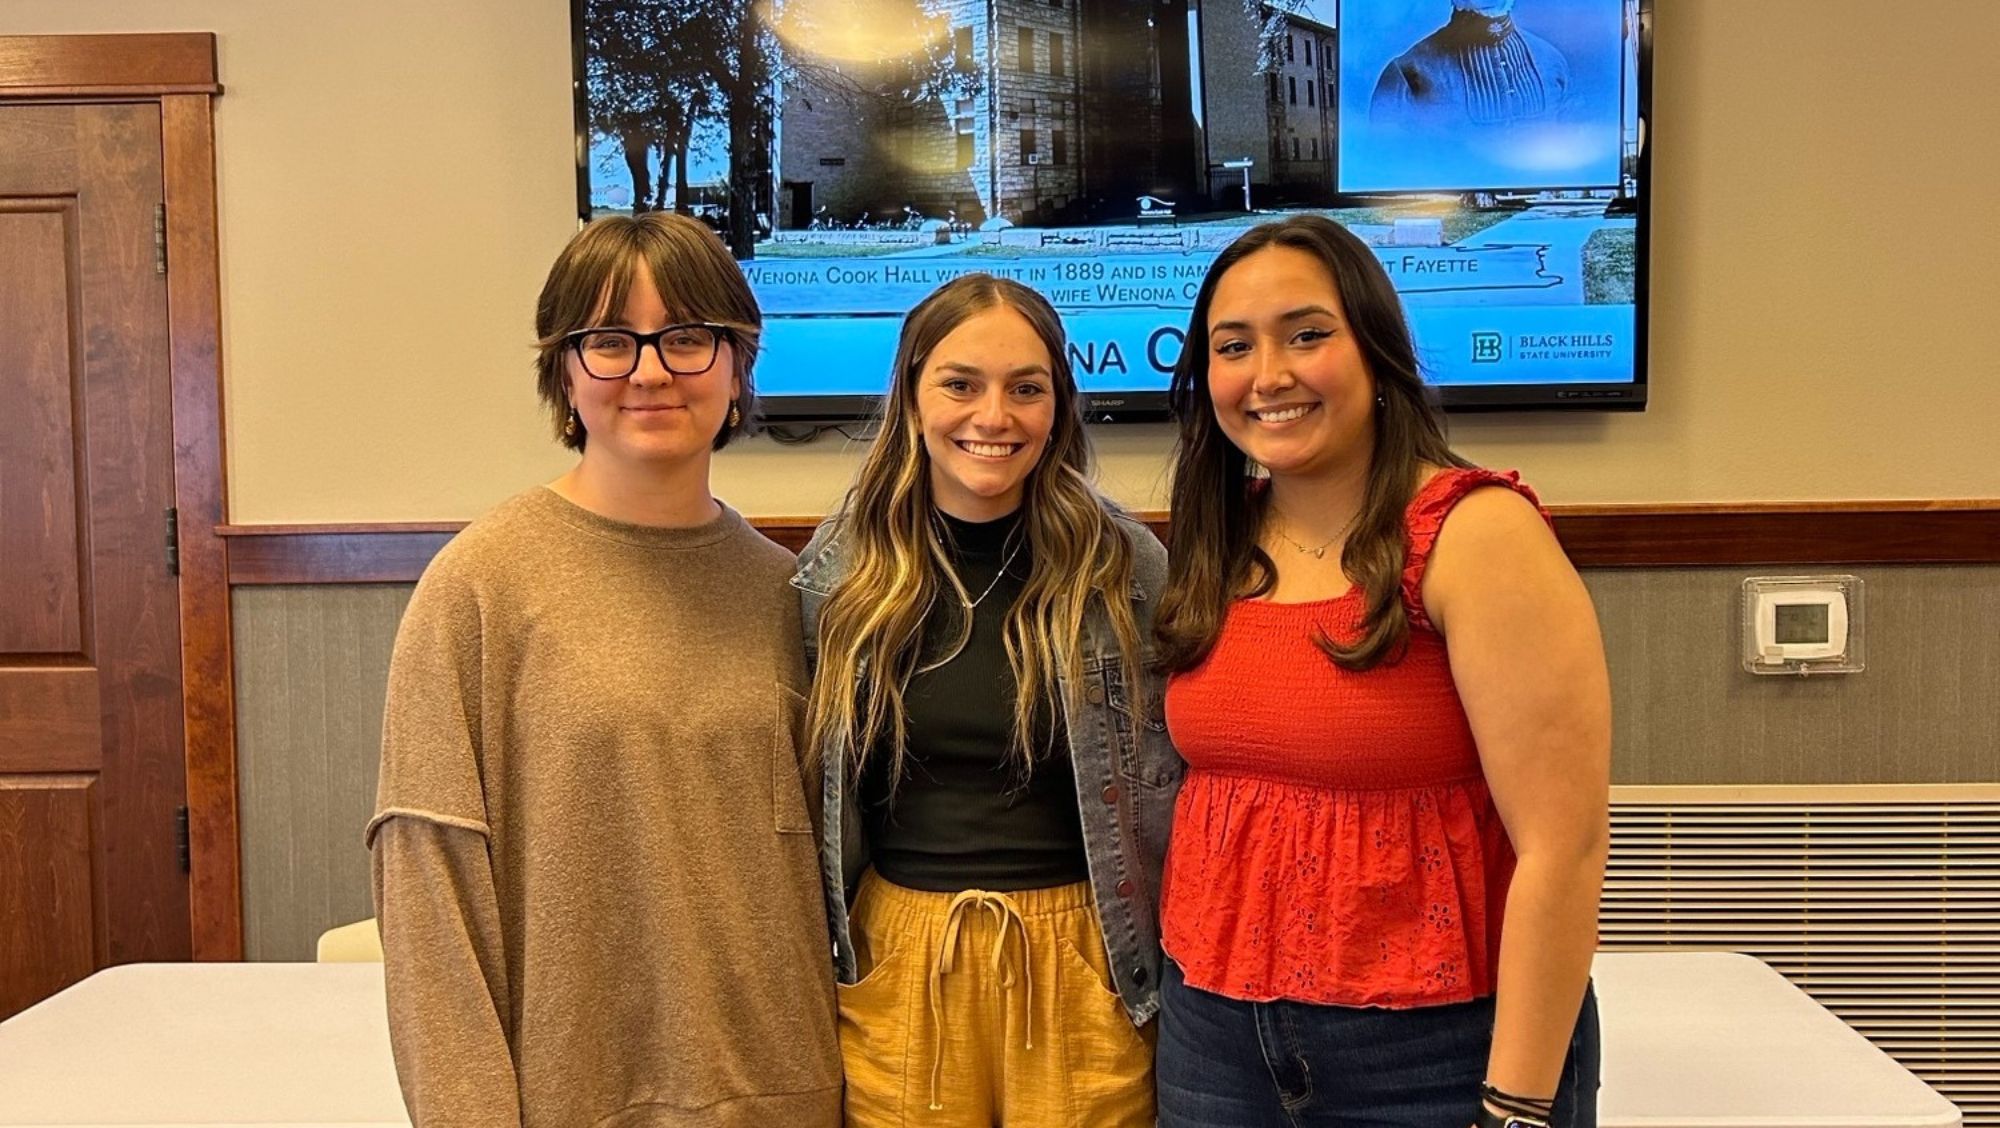 The Black Hills State University Make A Difference Initiative recently announced student Elly Storm (center) as the recipient of their 24-25 full-tuition scholarship. Students Arianna Loux-Scherer (left) and Alyssa Diaz (right) were selected as recipients of the initiative’s summer program.